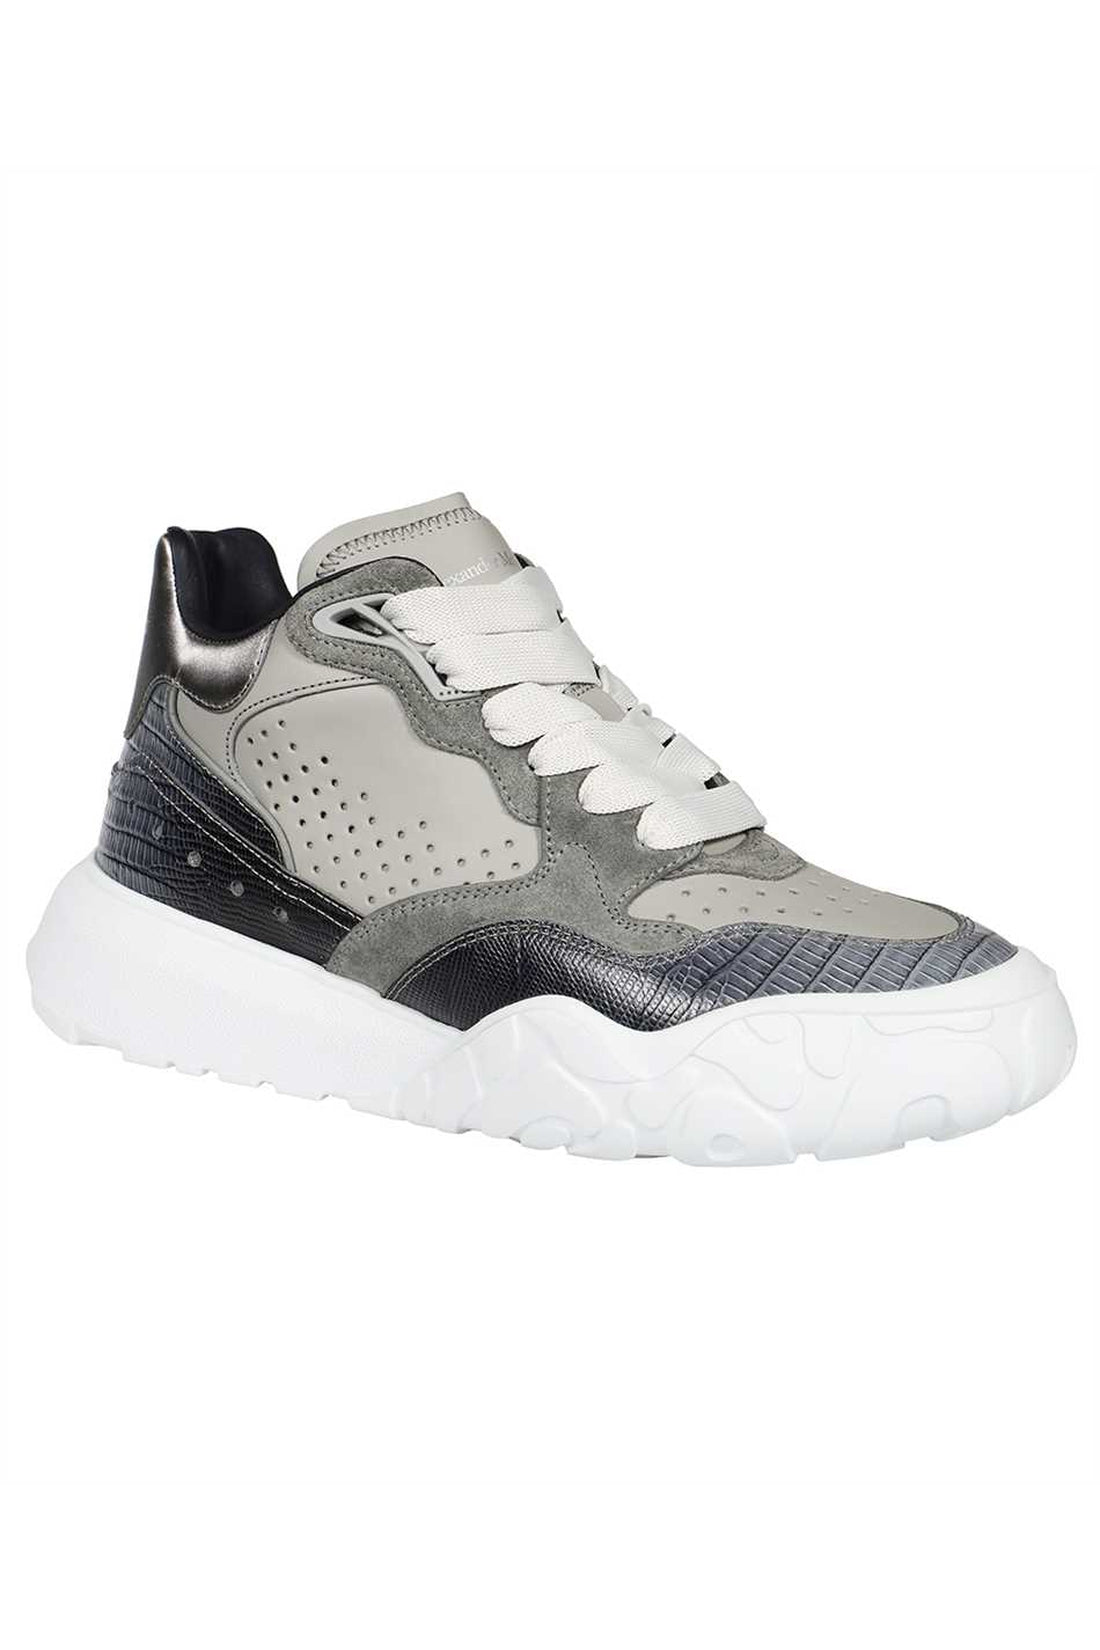 Alexander McQueen-OUTLET-SALE-Sprint Runner leather sneakers-ARCHIVIST